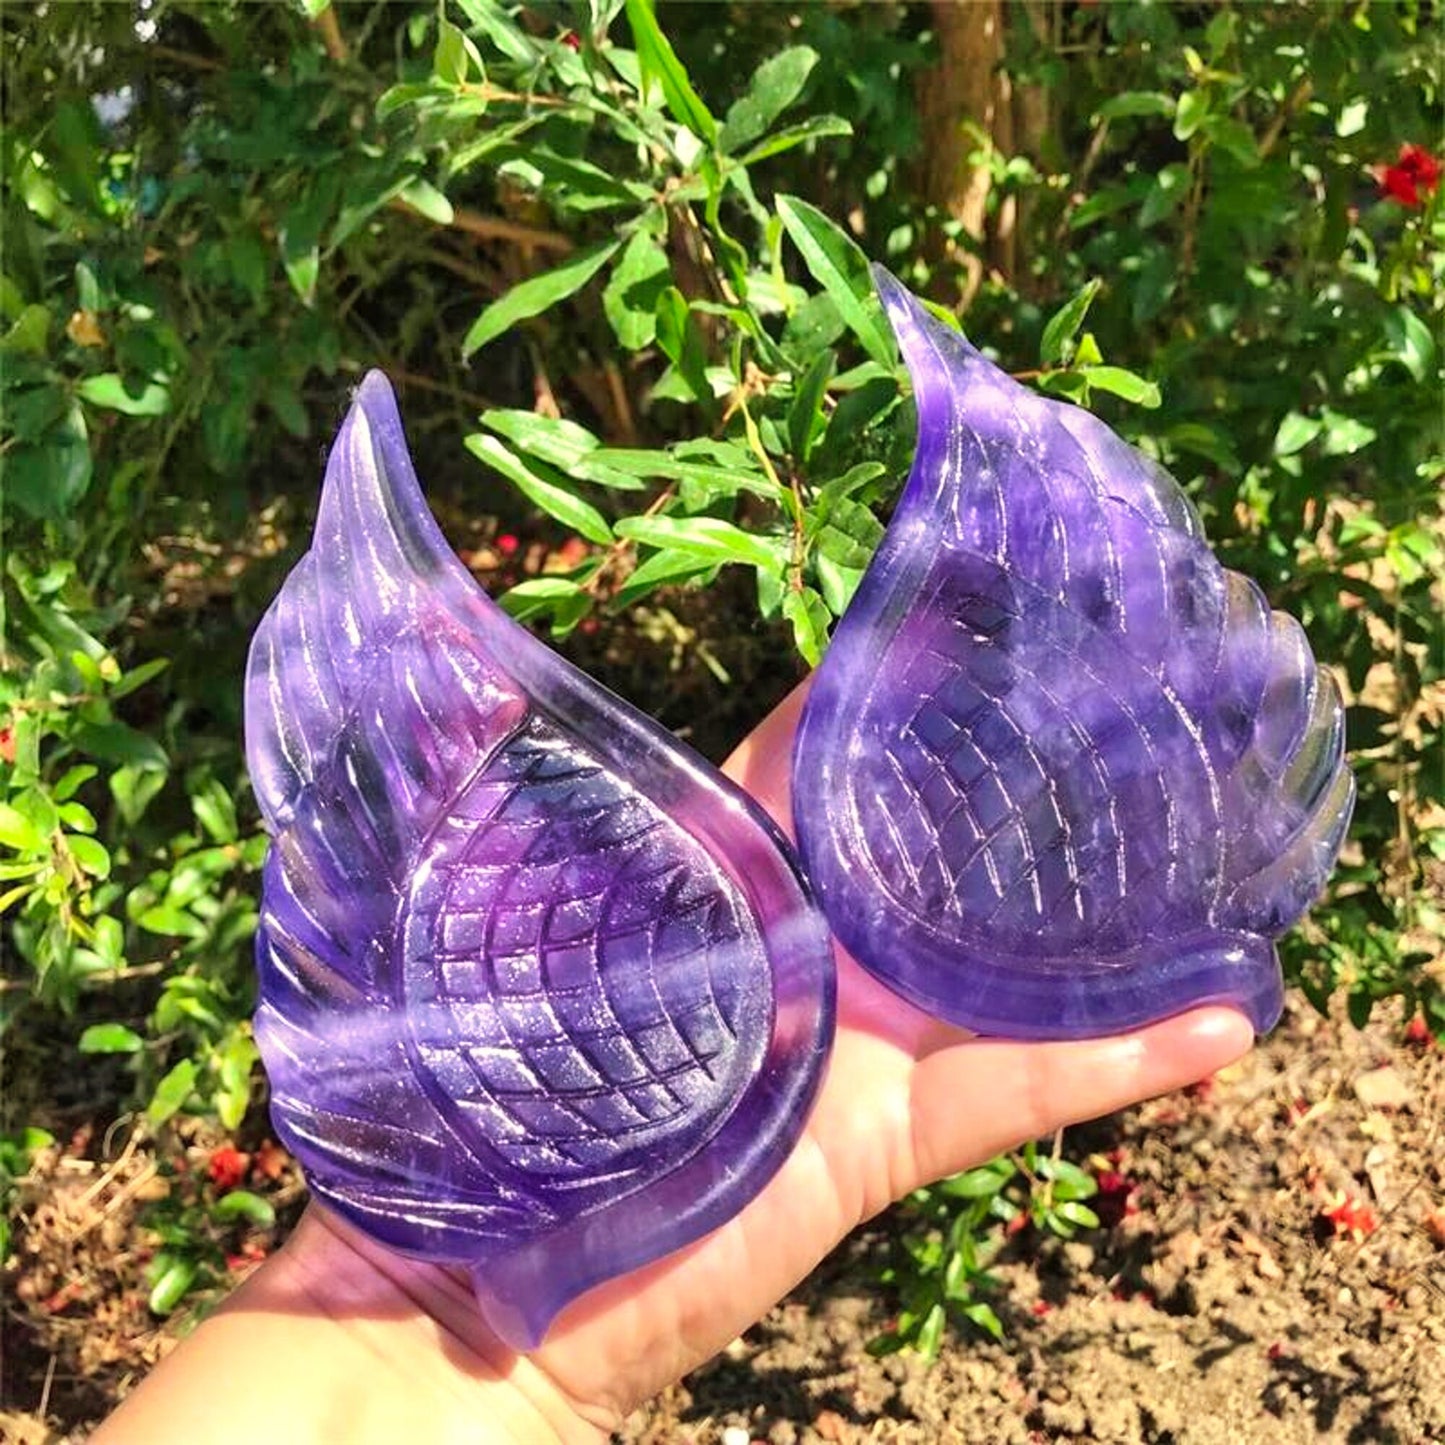 Natural Fluorite Crystal Carved Wing Statues- Set of 2 for Healin, Feng Shui, Aesthetic Home Decor and Reiki